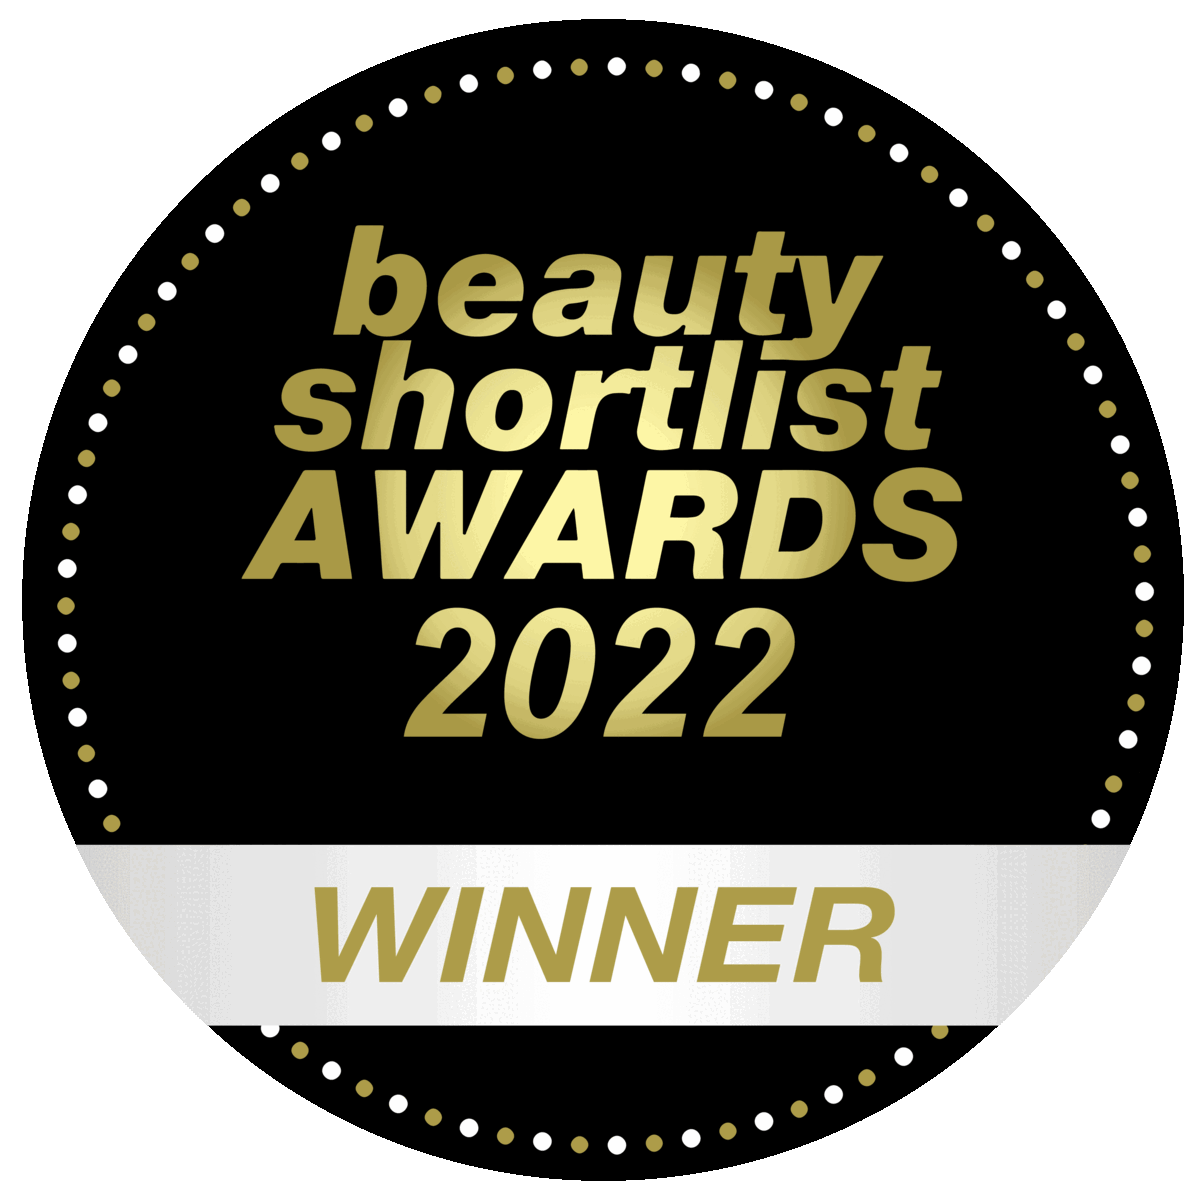 
            beauty shortlist awards 2022, Winner,
            KIND TO SKIN & PLANET SINCE 1984 
            Ingredients From Nature 
            Leaping Bunny Certified 
            Landfill-free Operations 
            oiA 
            Responsible Sourcing 
            Recyclable Packaging 
            